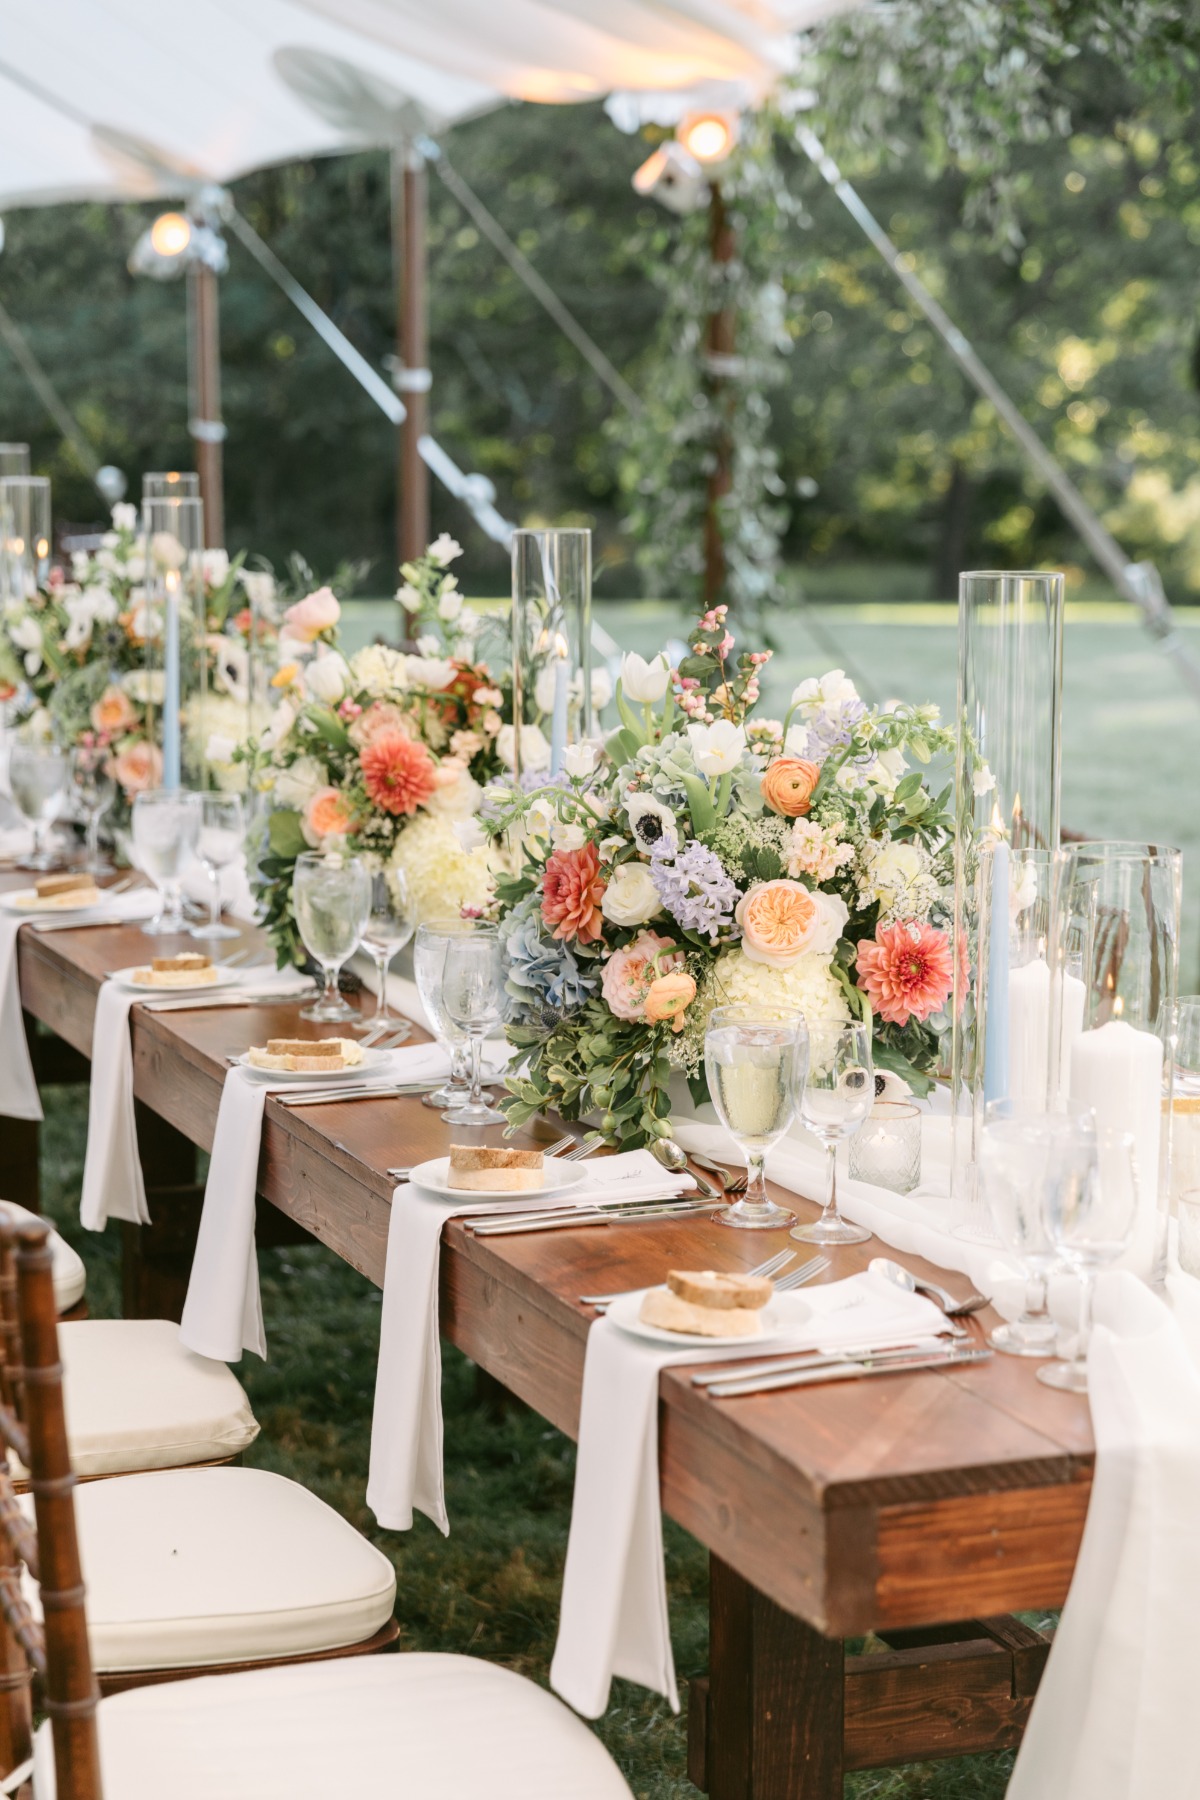 Reception table with floral centerpieces with pops of pink-orange and candles in glass votives